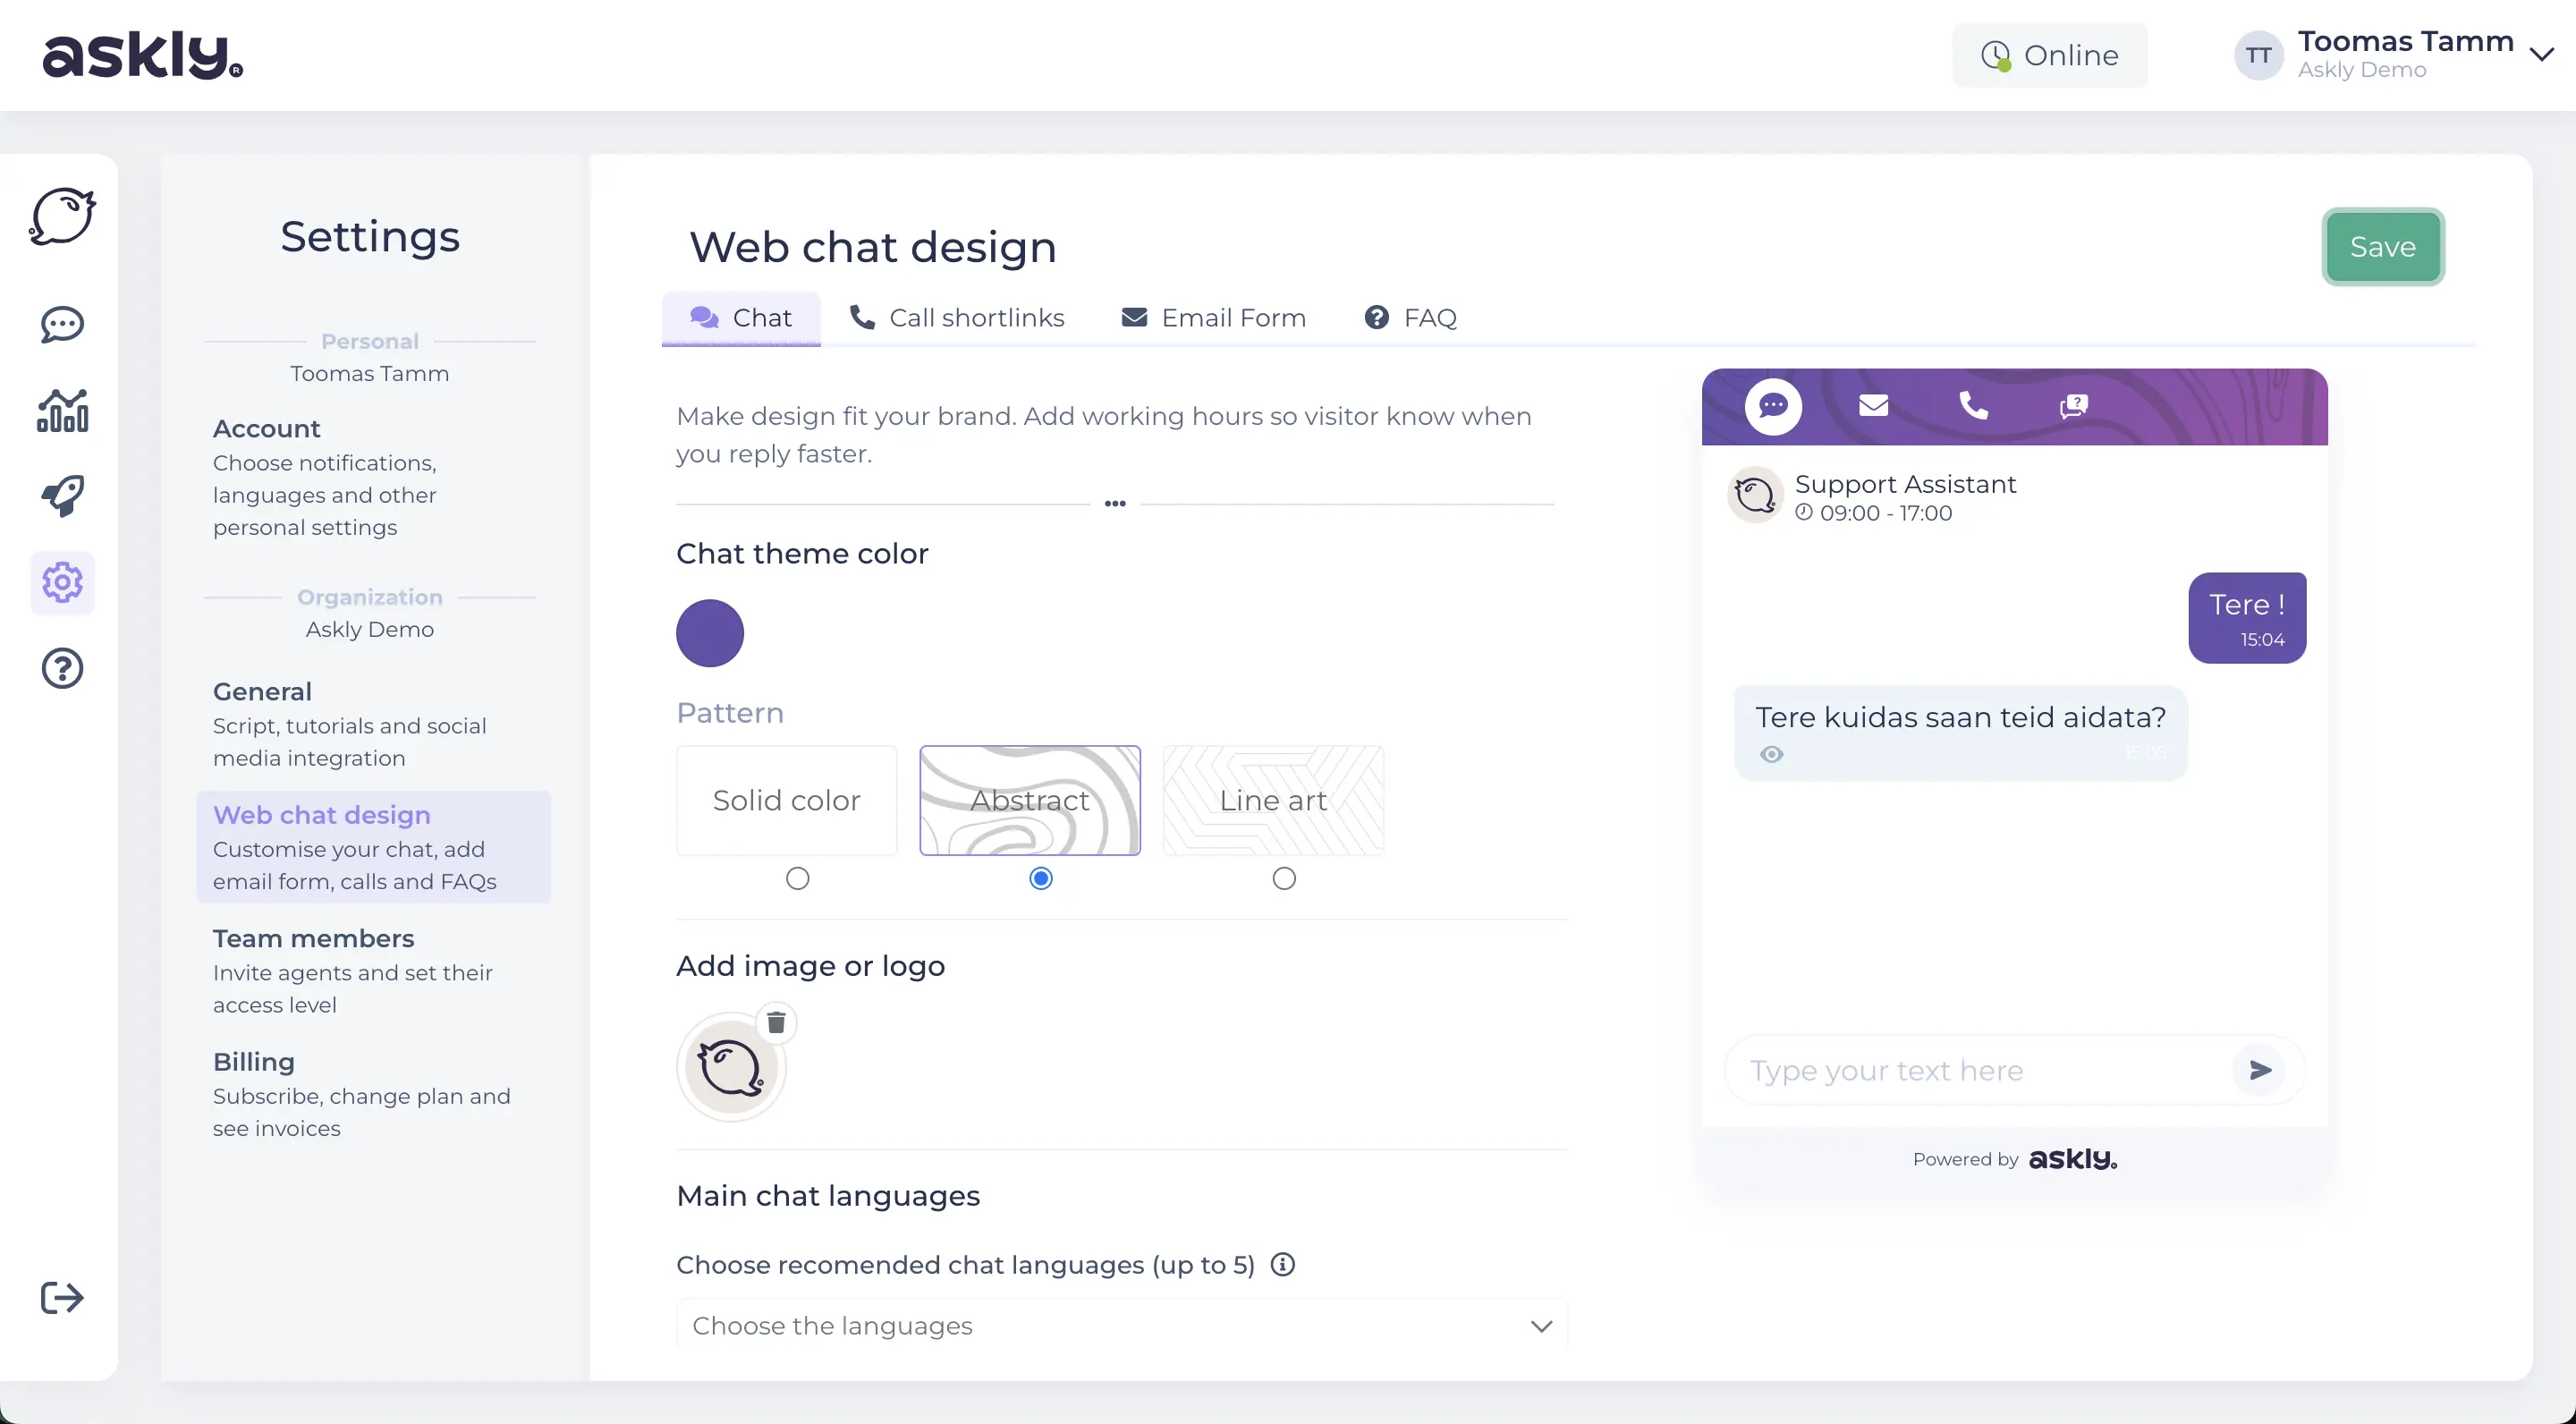 Personalize your chat